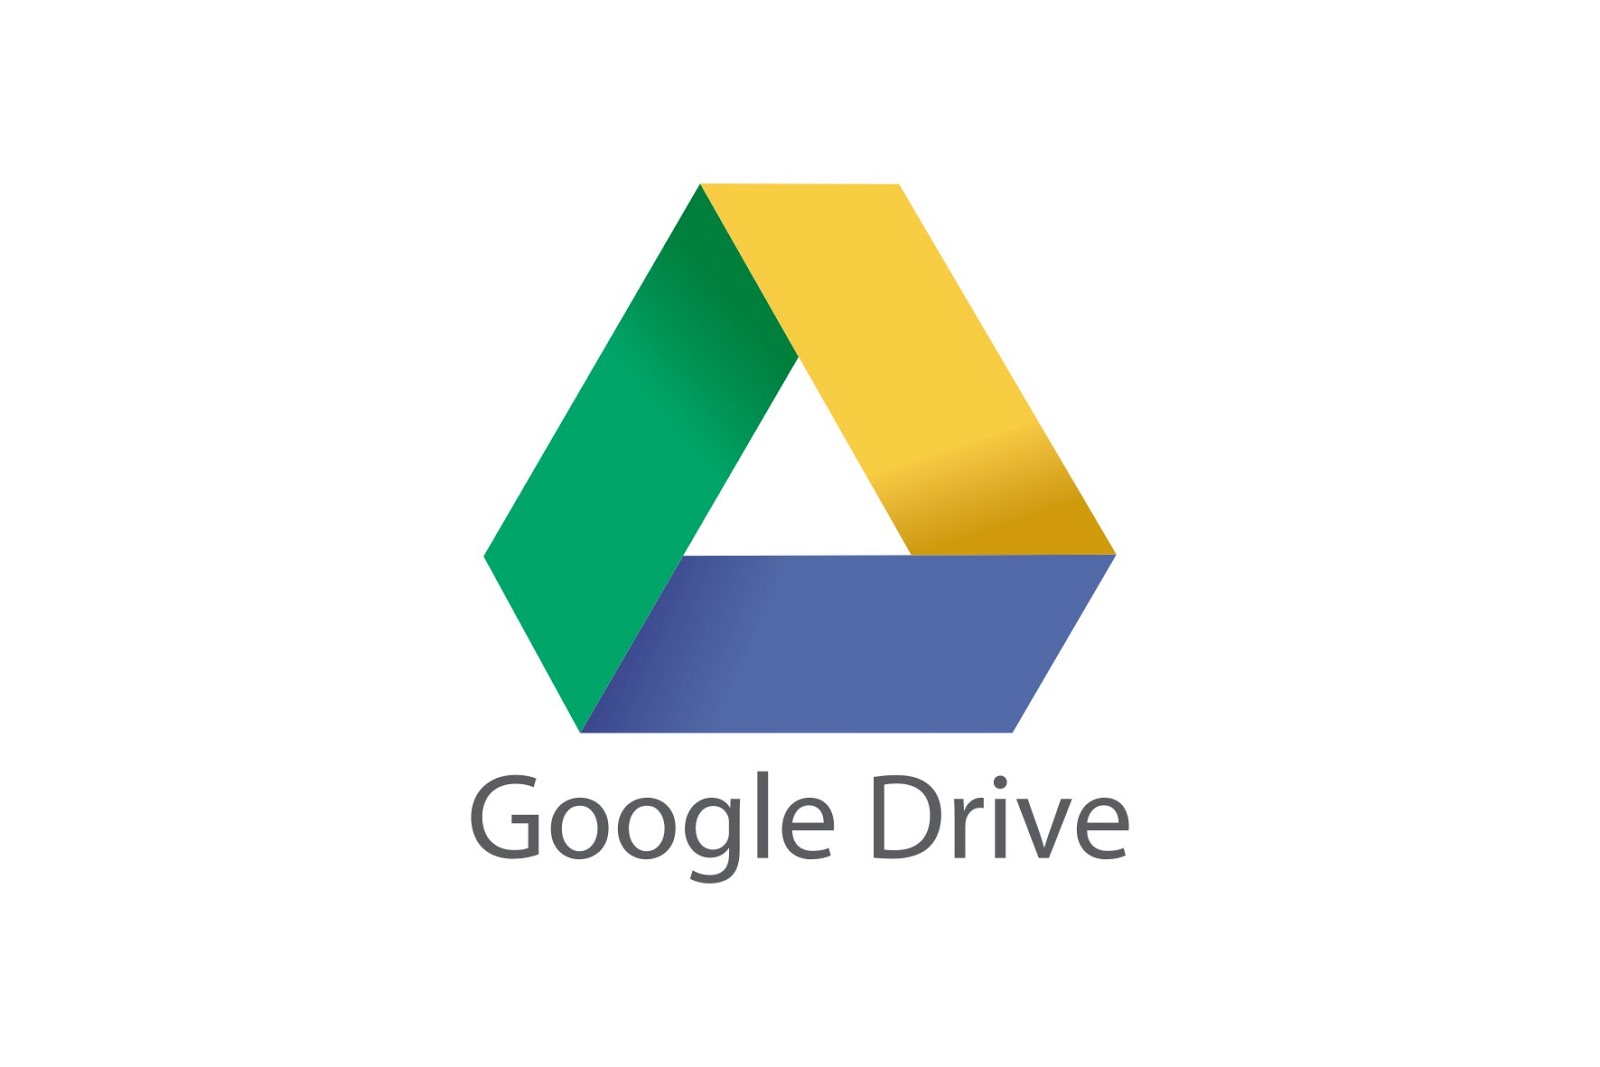 Triangle with a green side, a yellow side, and a blue side and the words Google Drive below it